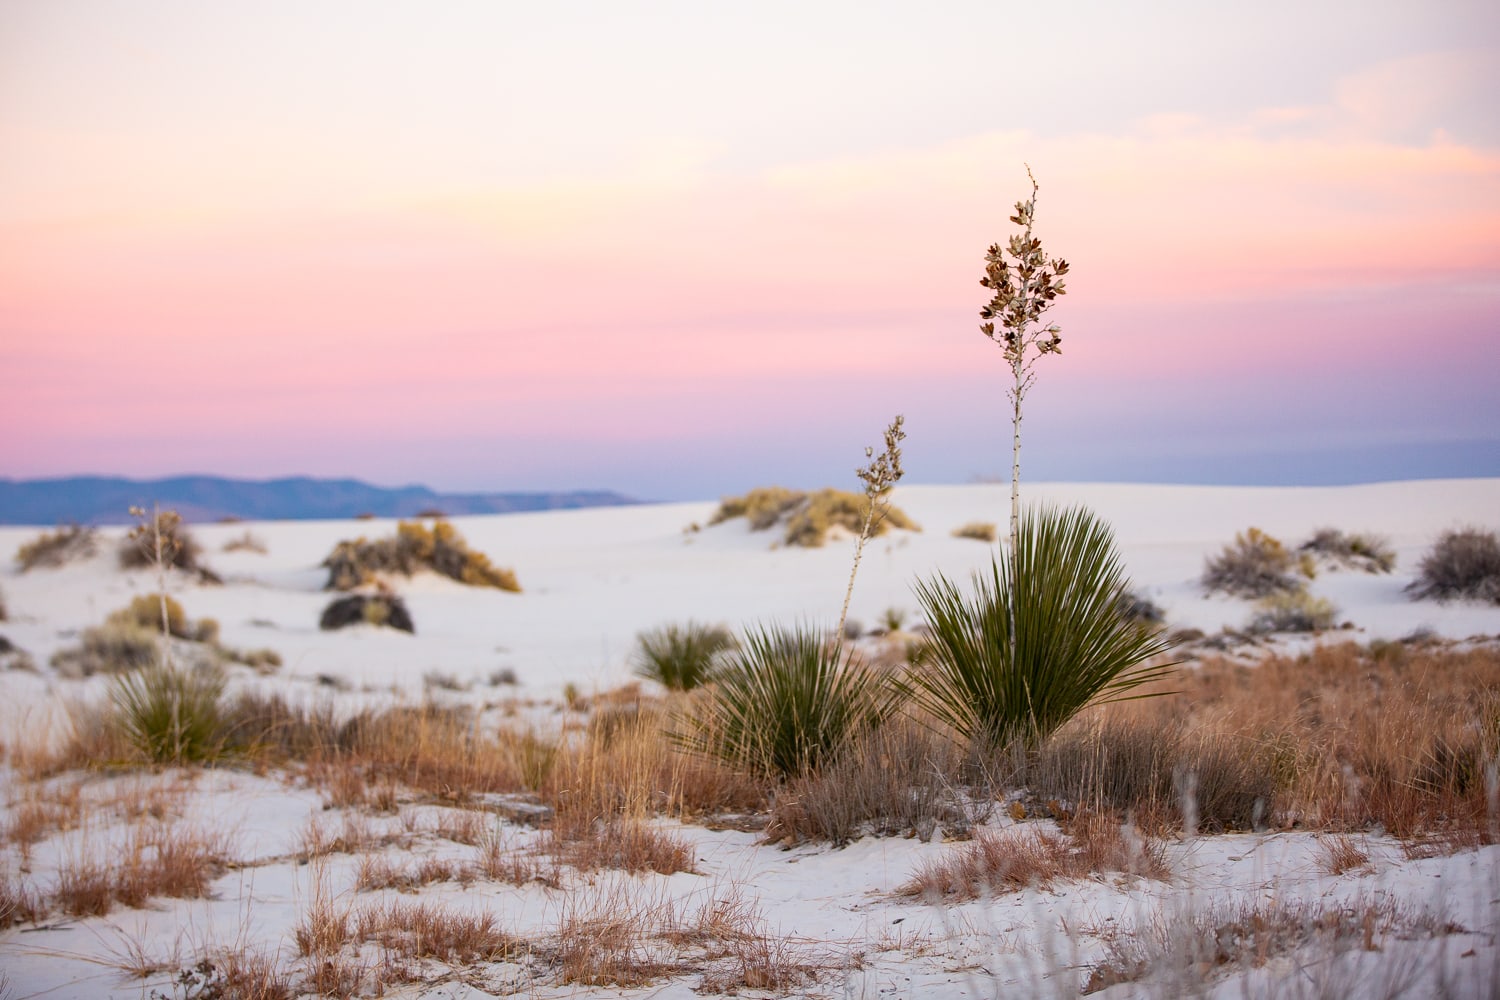 A group of Yucca grows out of the sand at White Sand Dunes National Park, surrounded by smaller brush vegetation, with a vivid sunset in the background.